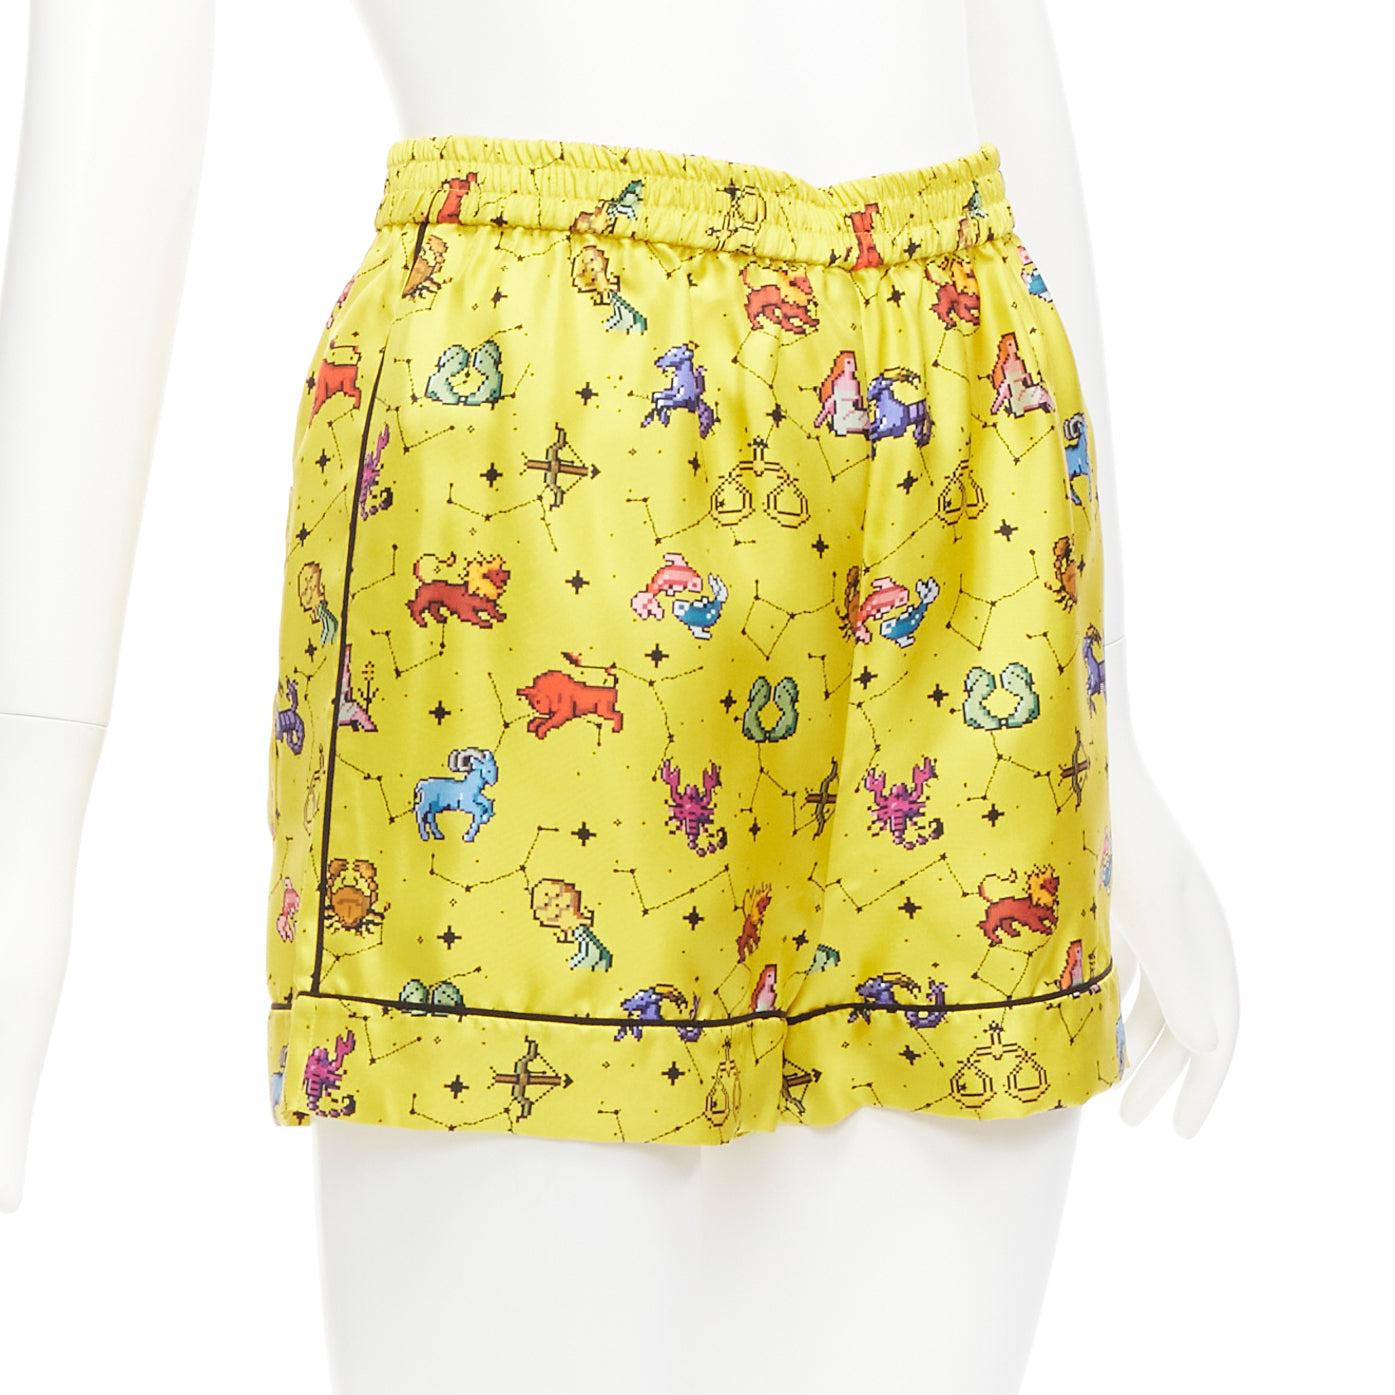 CHRISTIAN DIOR 100% silk Lucky Dior yellow astrology boxer shorts FR32 XXS
Reference: AAWC/A00887
Brand: Dior
Designer: Maria Grazia Chiuri
Collection: Lucky Dior
Material: Silk
Color: Yellow, Multicolour
Pattern: Abstract
Closure: Elasticated
Extra